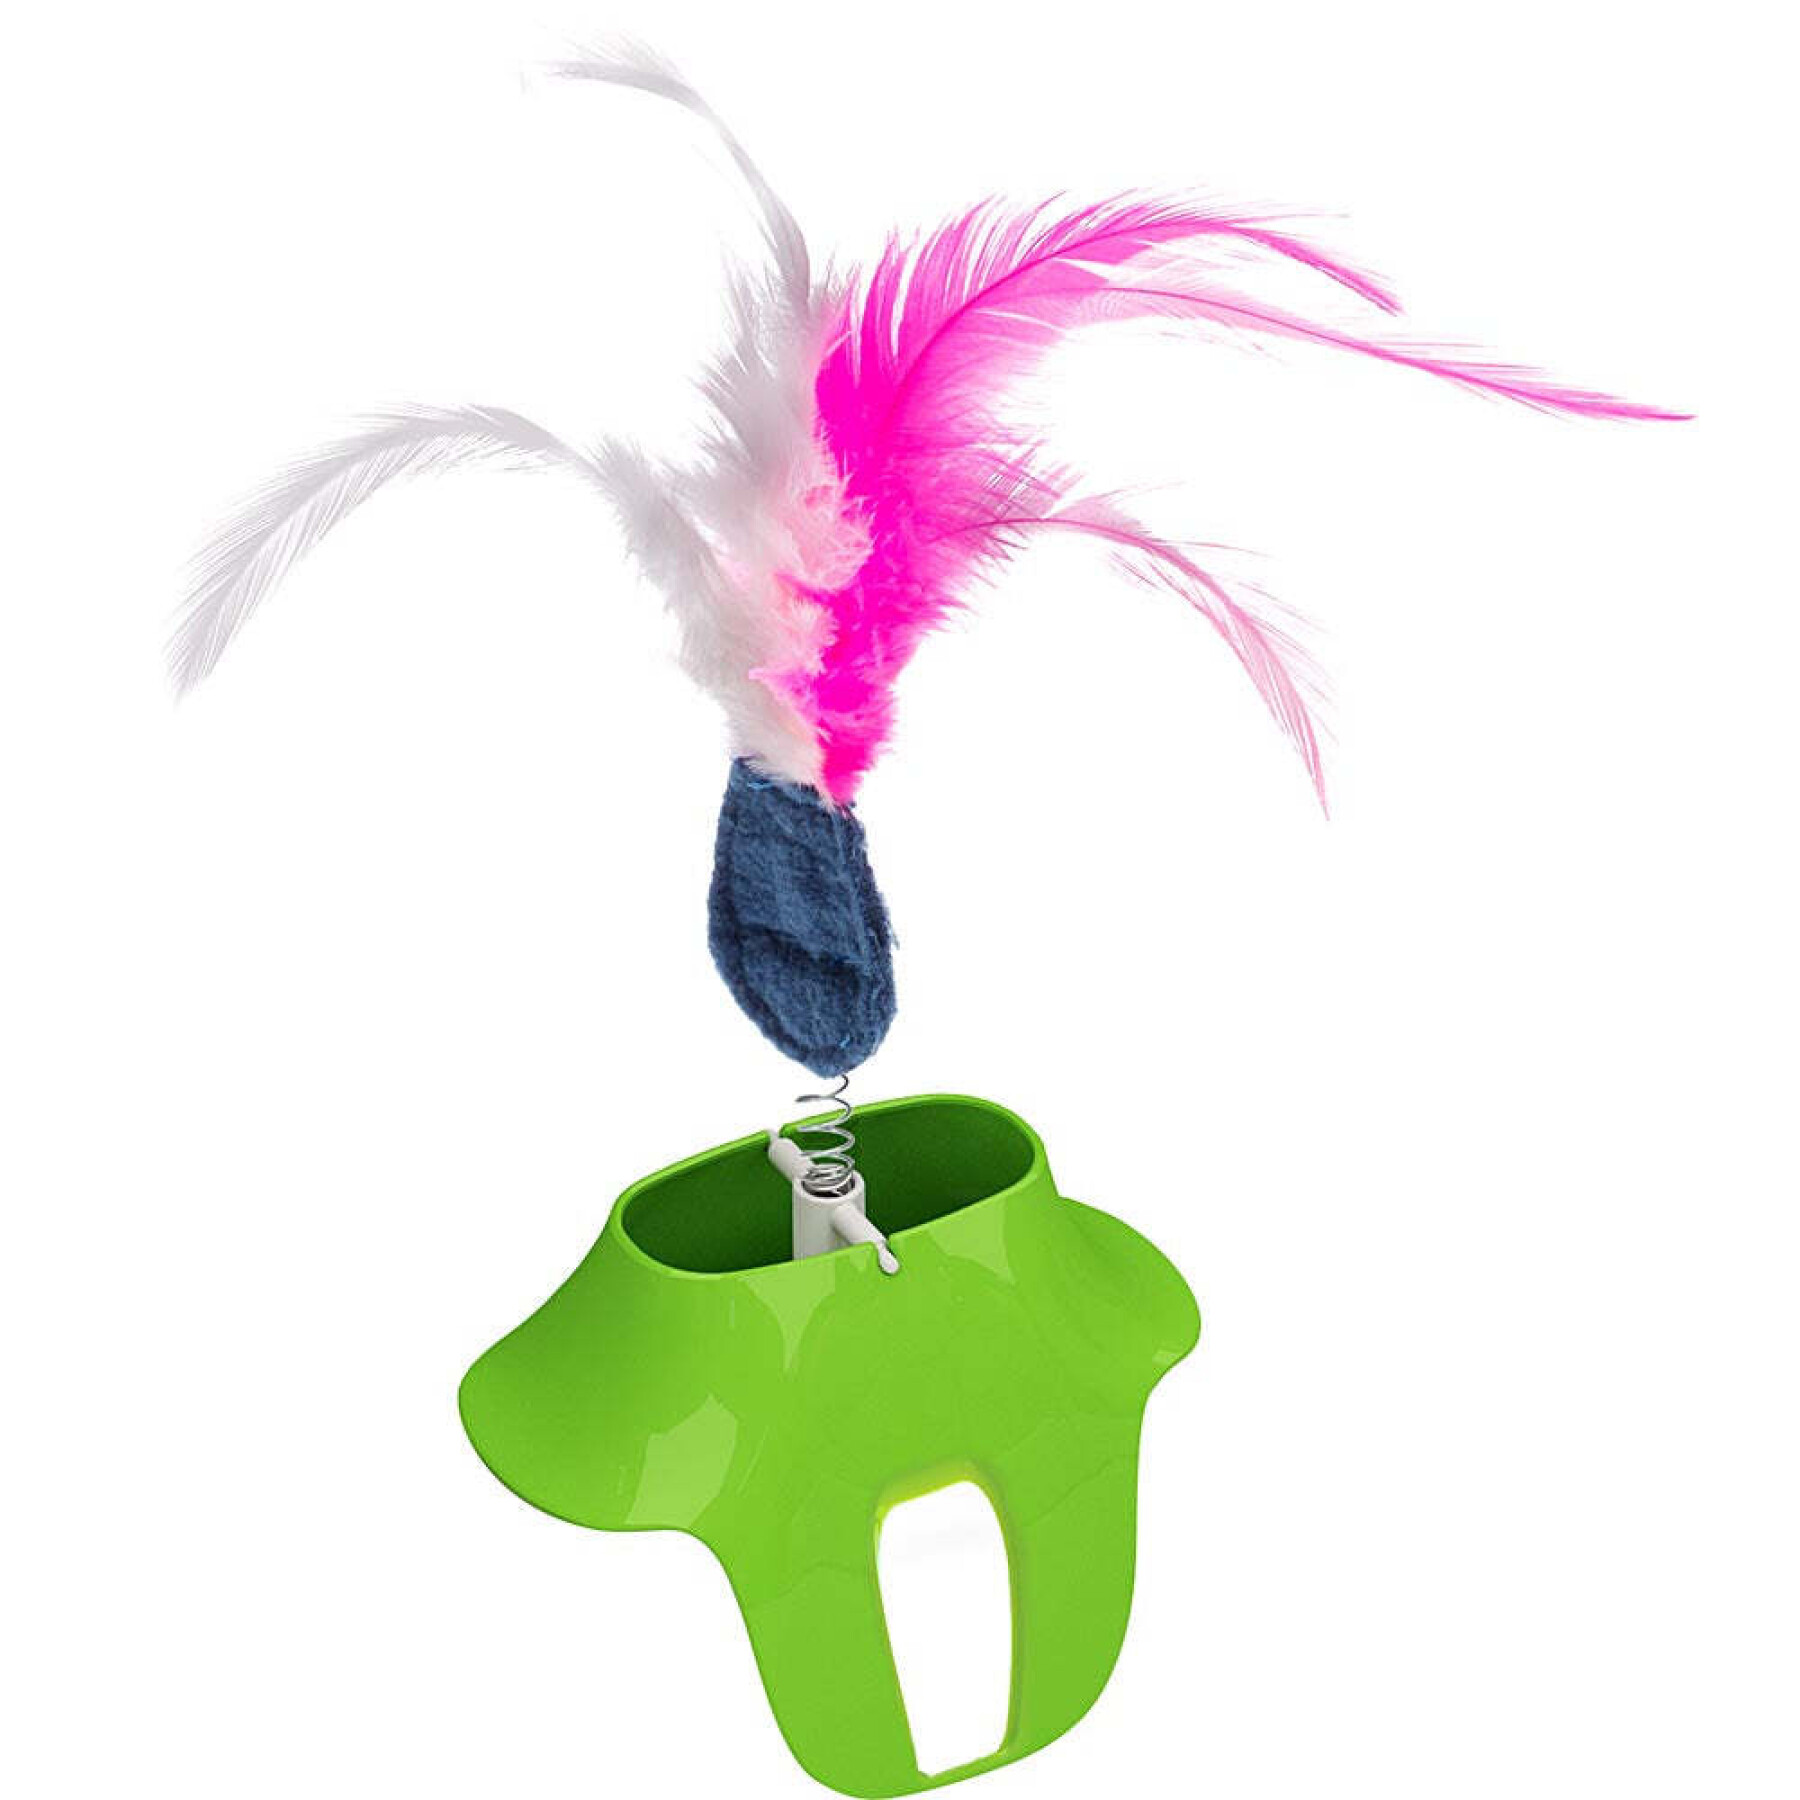 Feather cat toy Ferplast FPI 5197